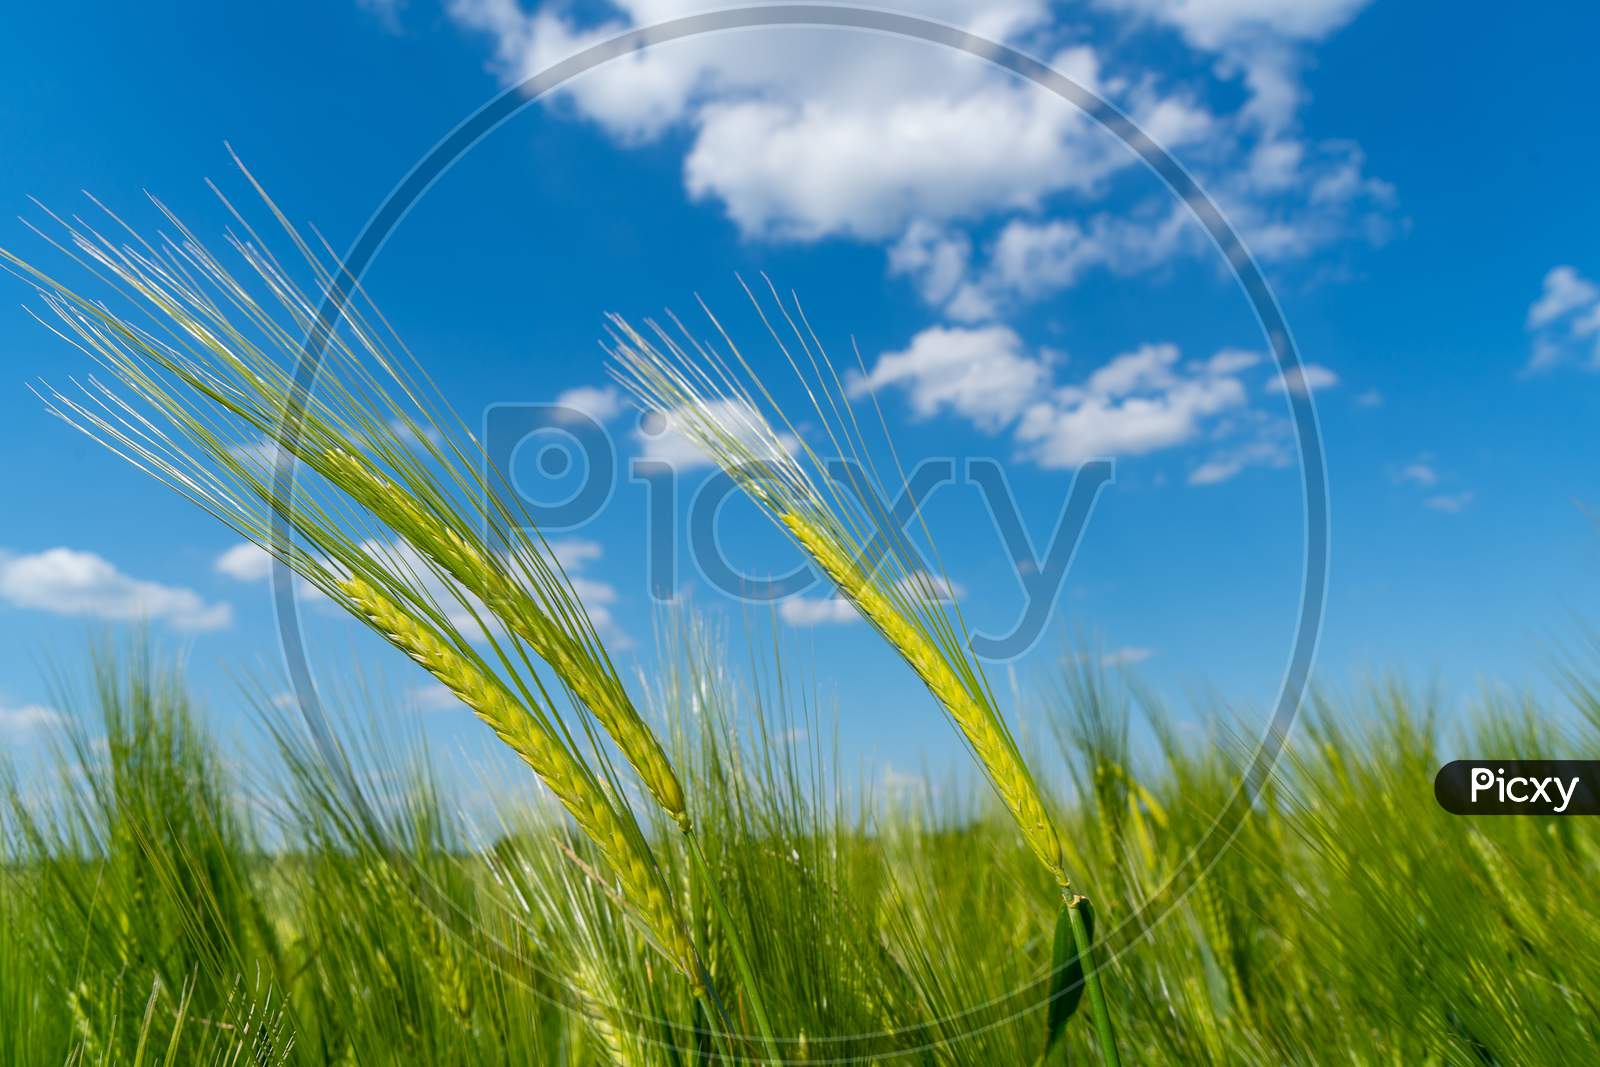 Ripening Bearded Barley On A Bright Summer Day Day. It Is A Member Of The Grass Family, Is A Major Cereal Grain Grown In Temperate Climates Globally.